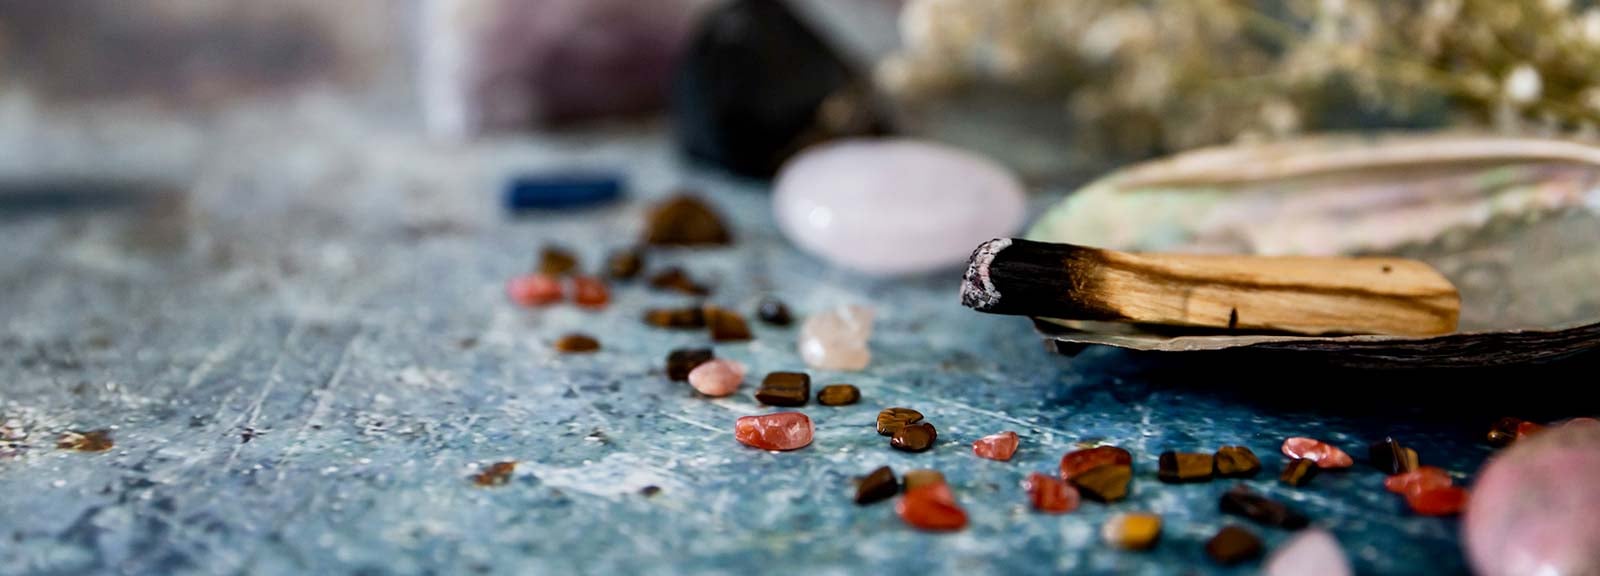 colorful healing crystals and stones